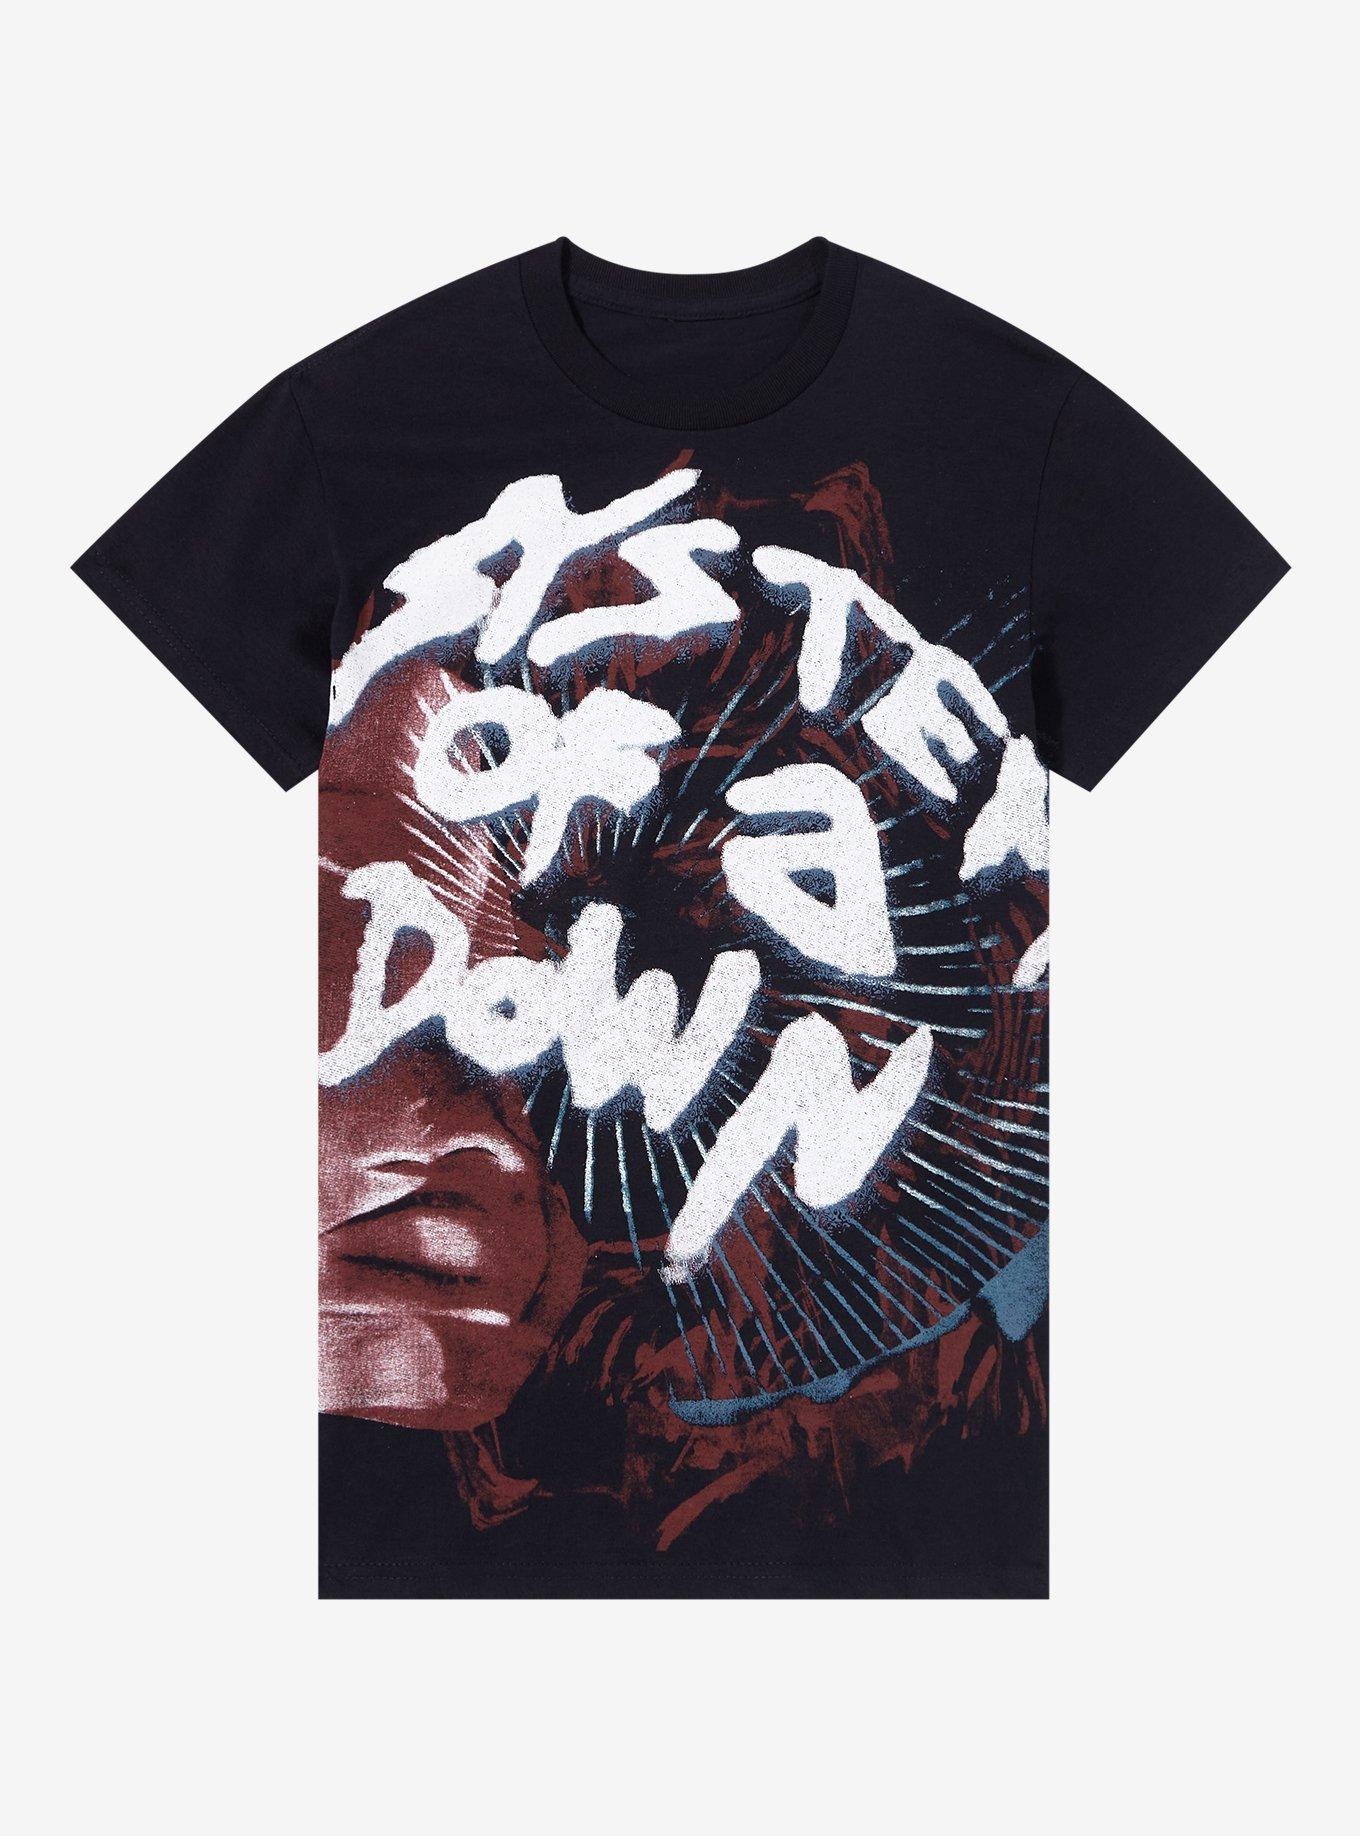 System Of A Down Jumbo Graphic Boyfriend Fit Girls T-Shirt, BLACK, hi-res